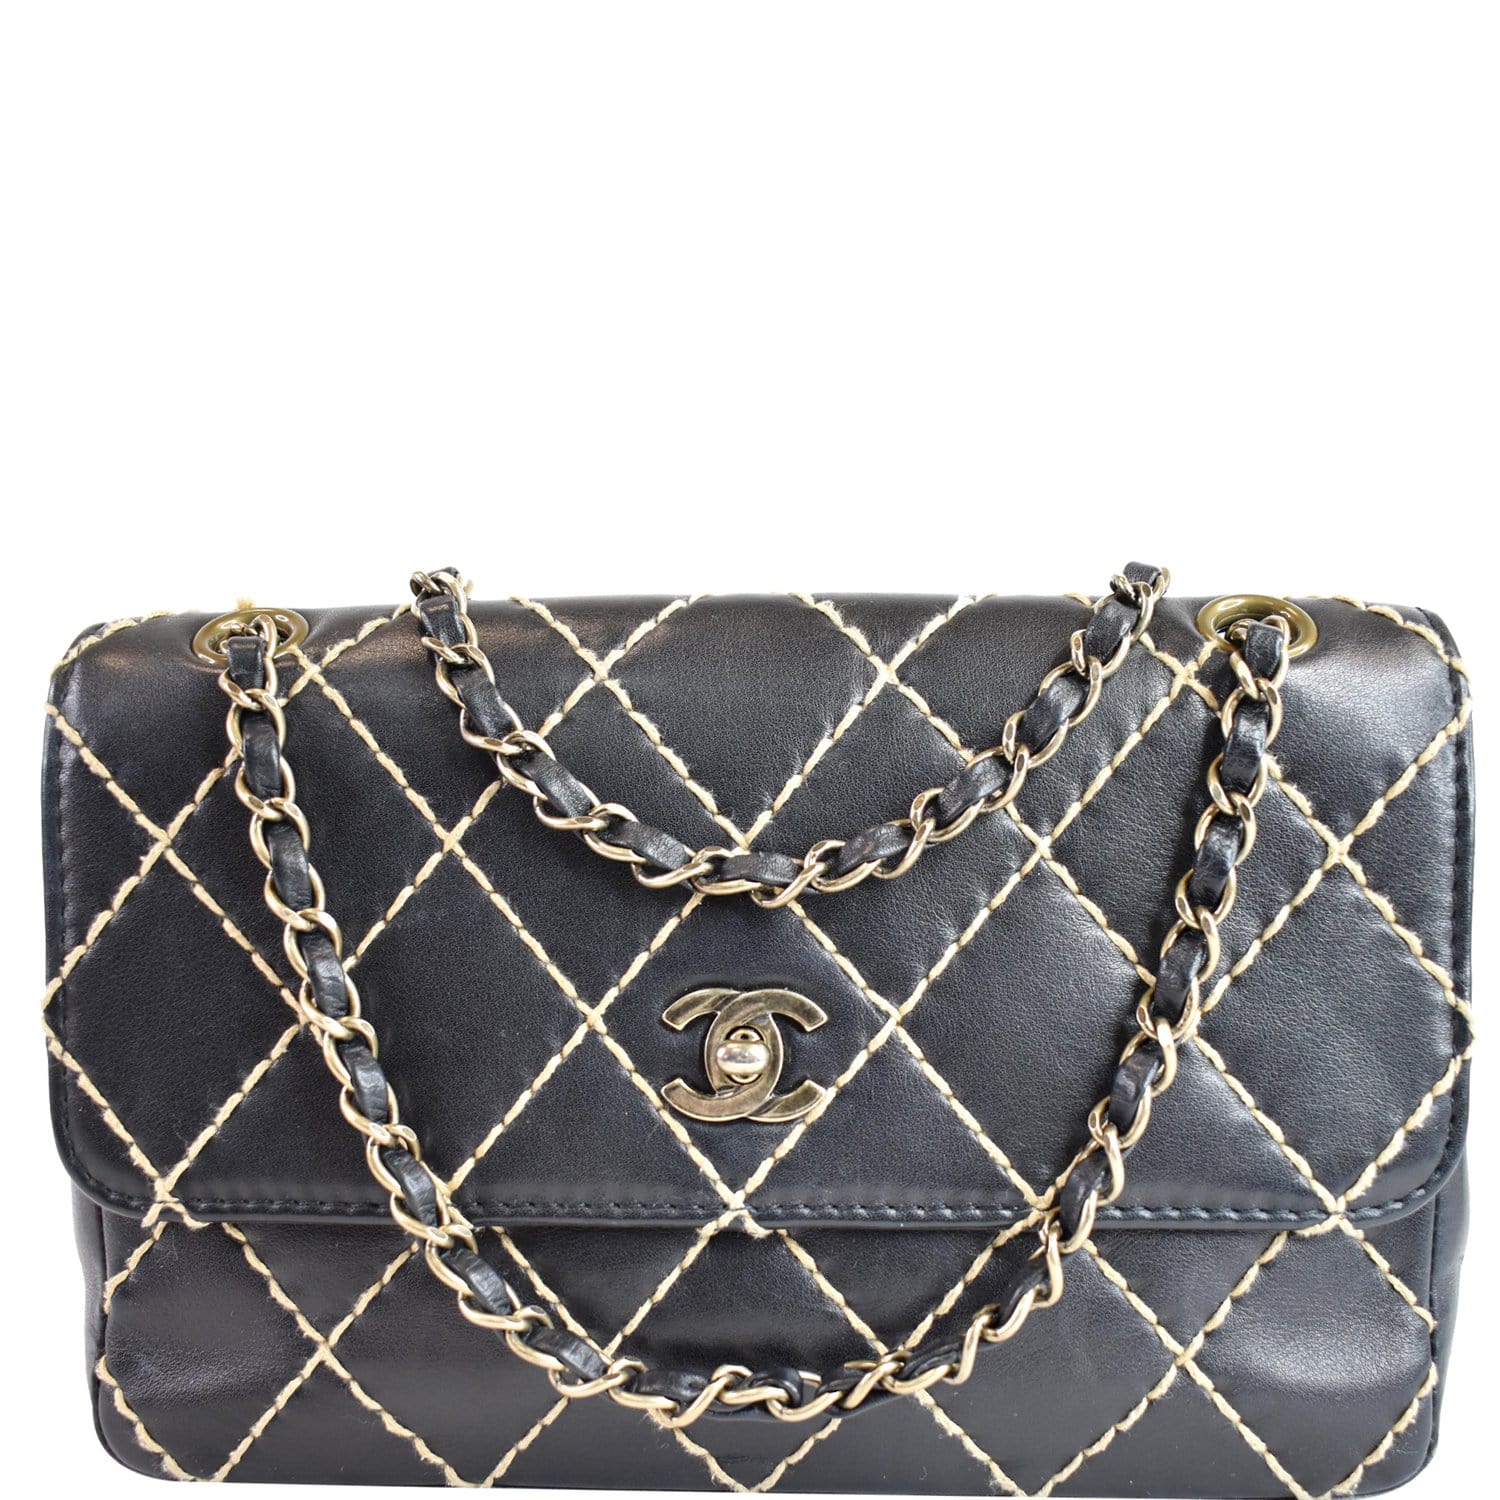 Chanel Medium Logo Gold Enchained Calfskin Quilted Black Leather Flap Bag